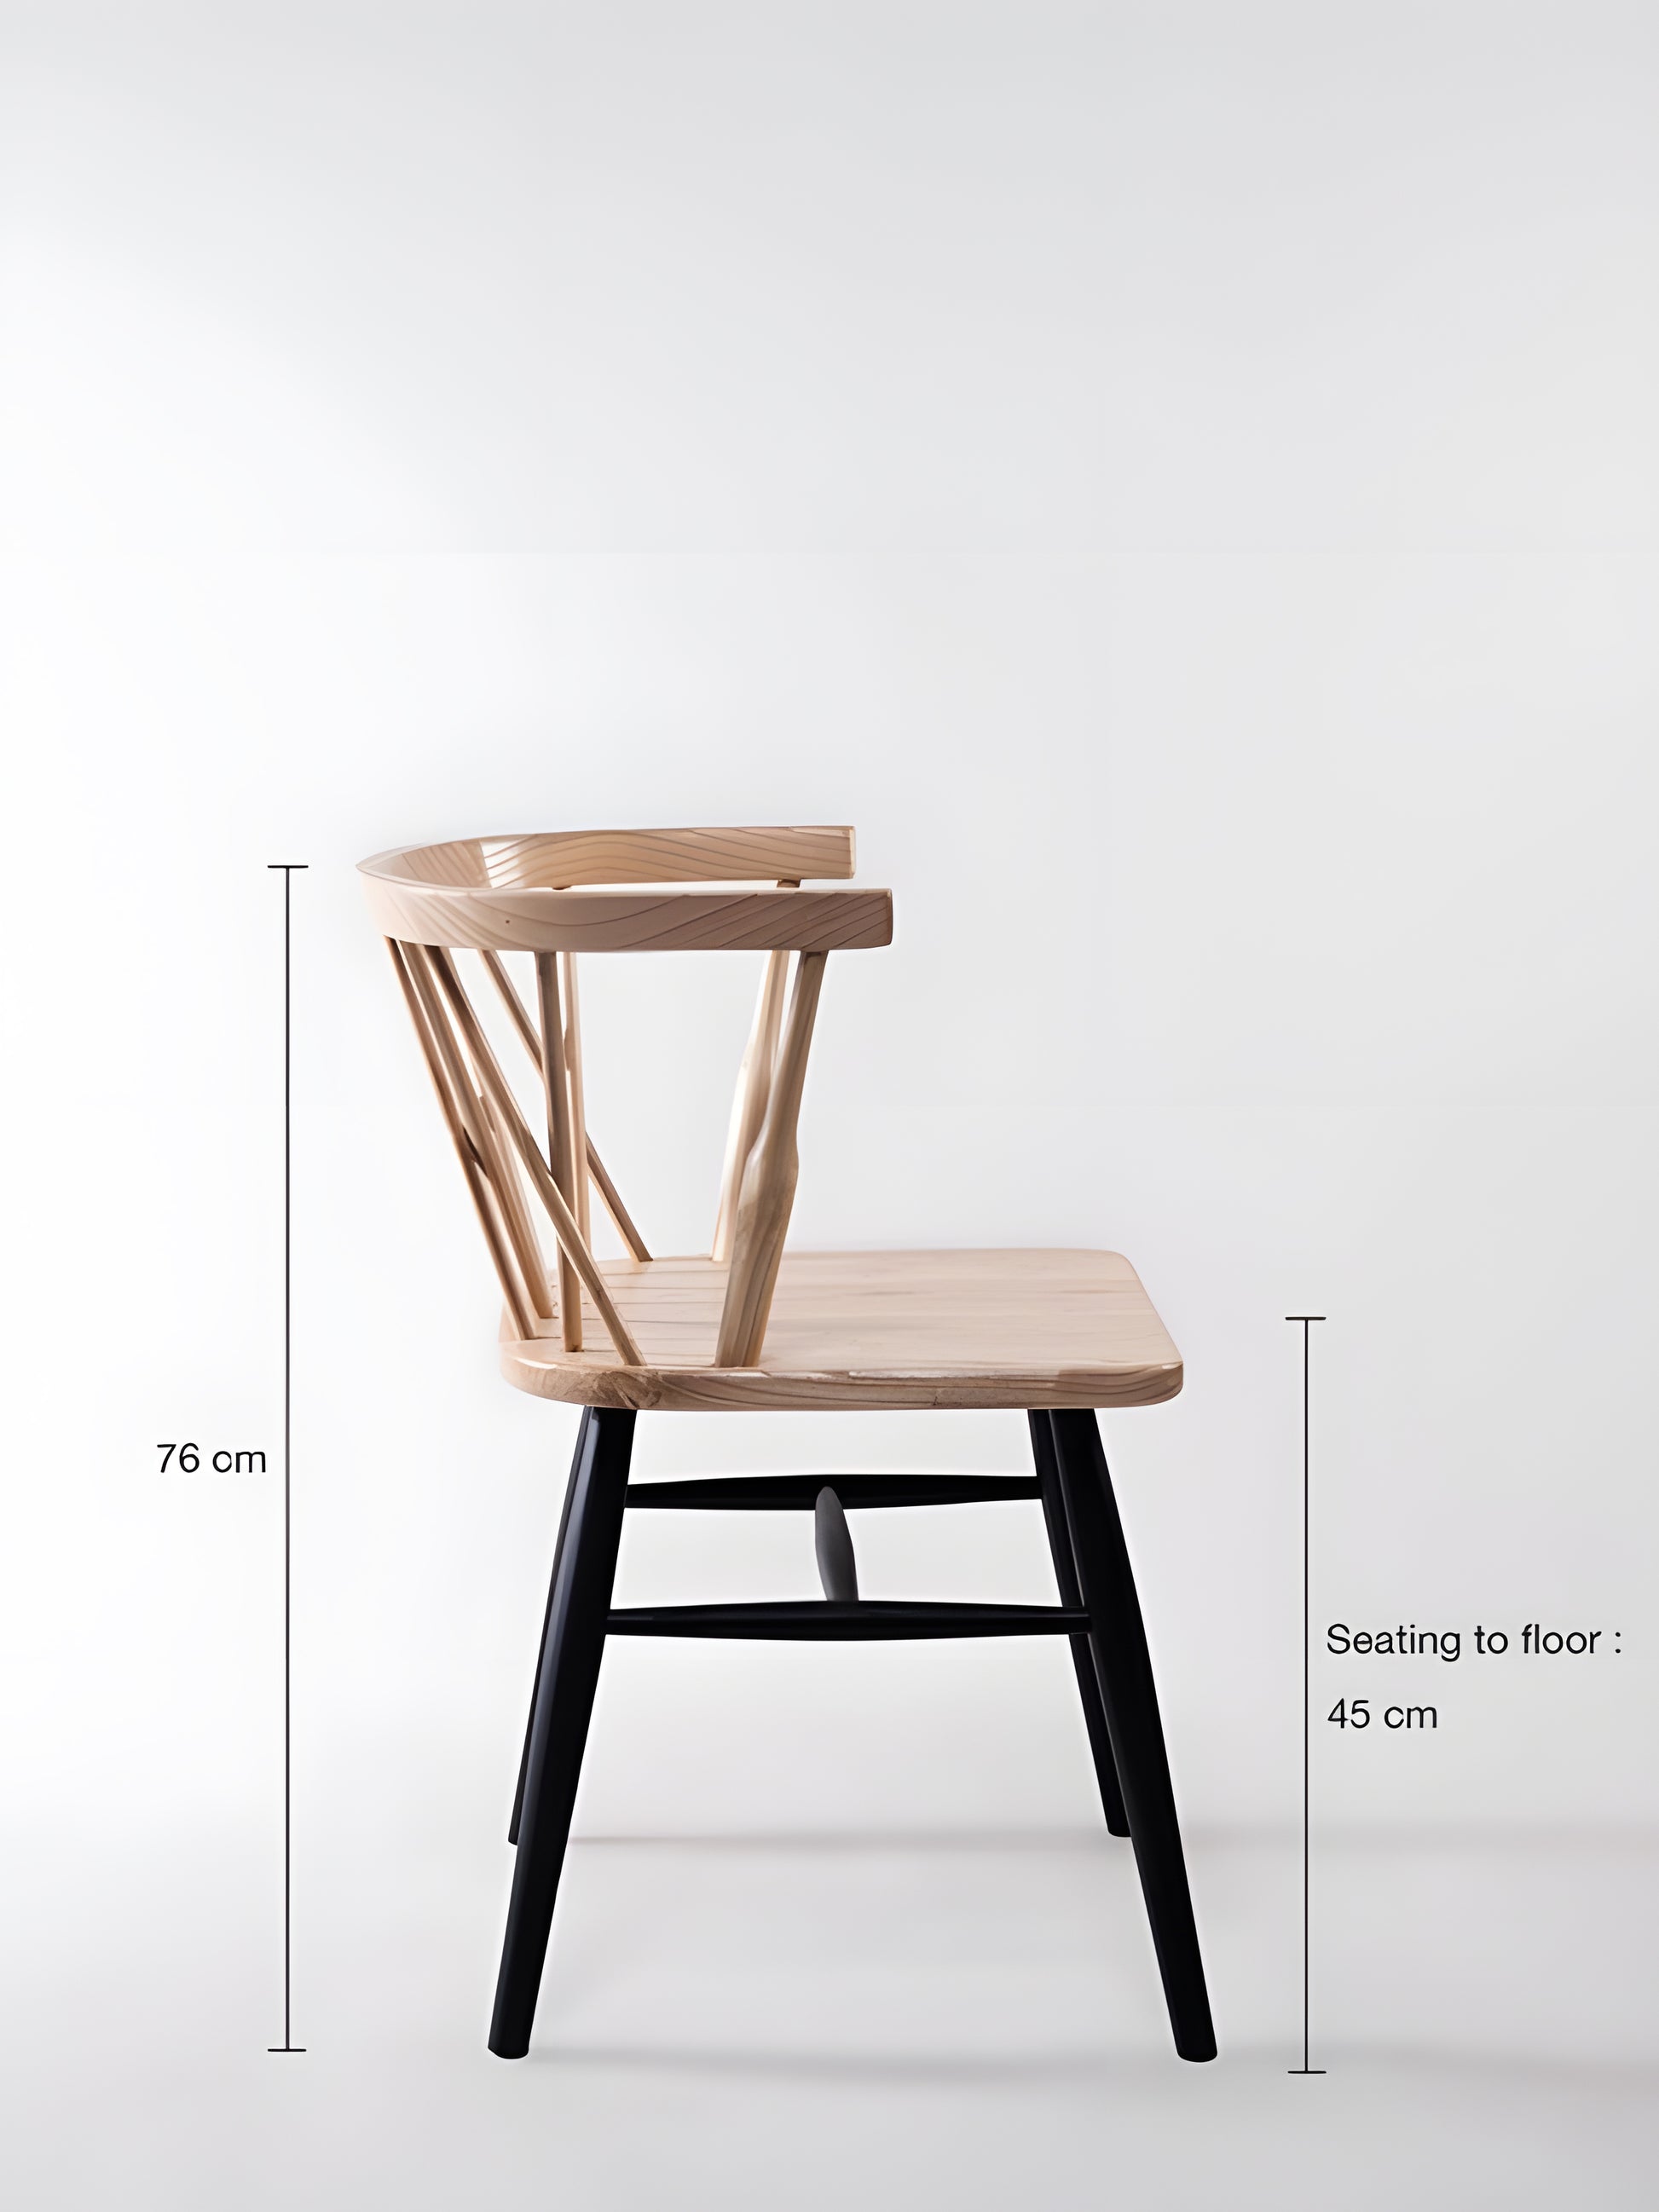 Fallas Sungkai Wood Cross Back Dining Chair with black painted legs side view with measurement by Mellowdays Furniture